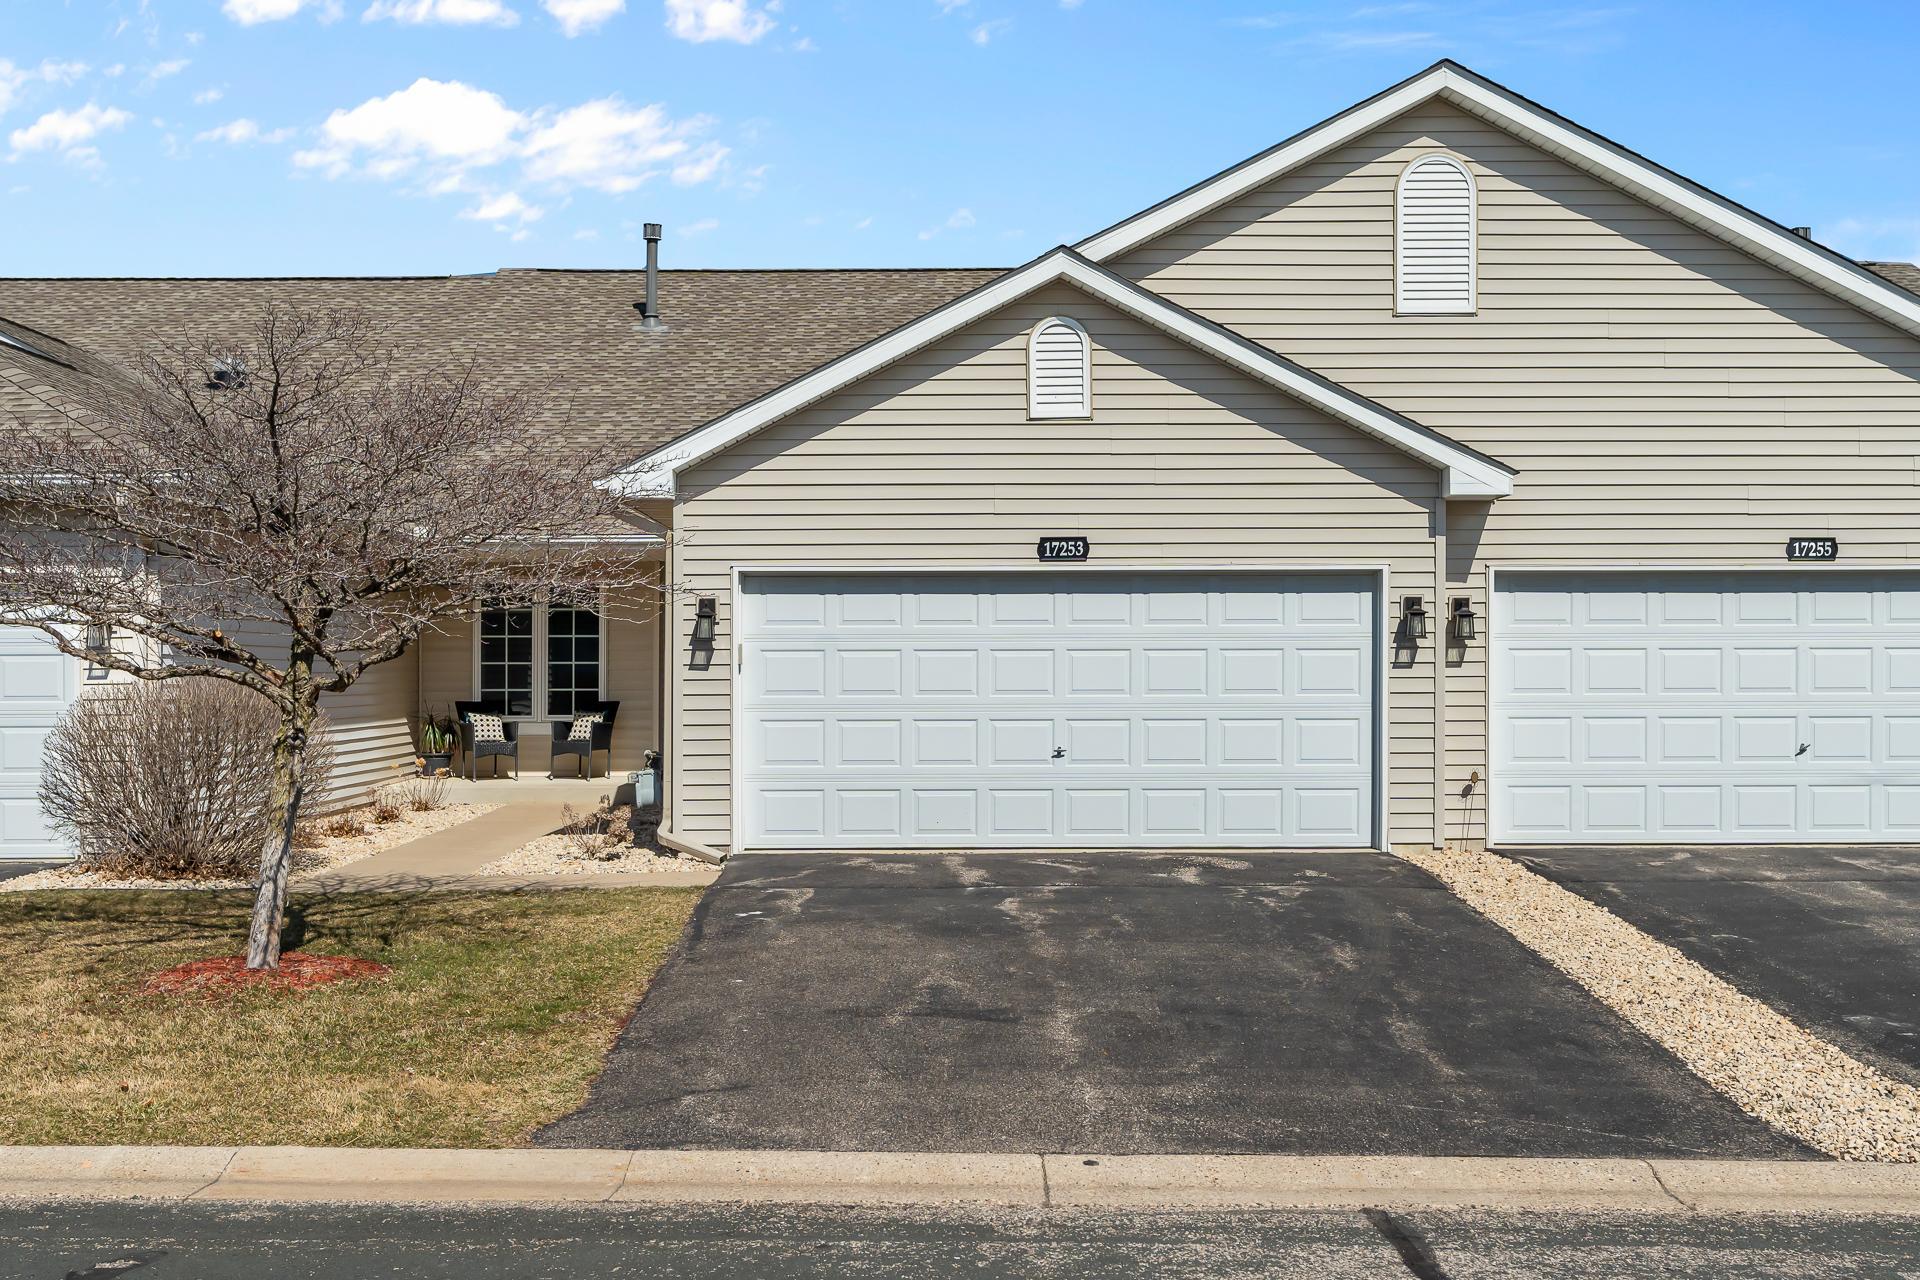 Don't miss out on this desirable Deerfield rambler style townhome!